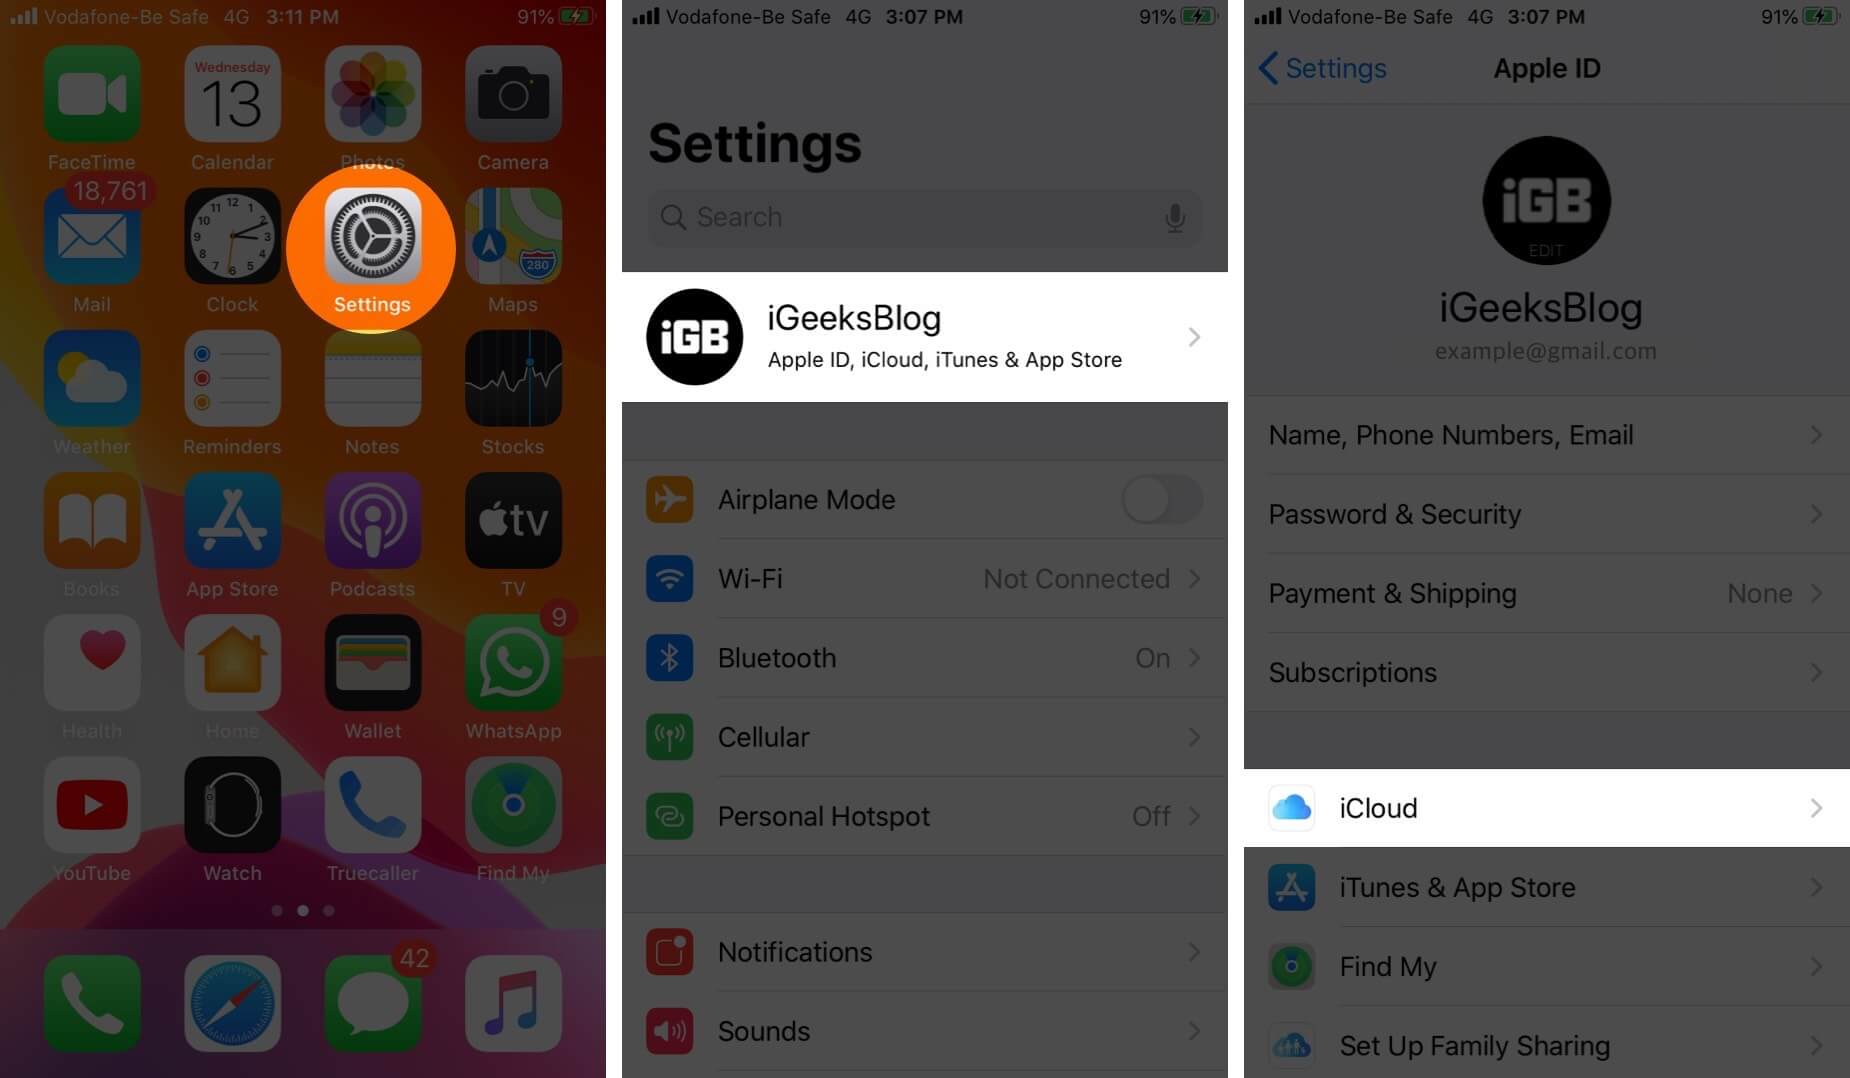 Open Settings Tap on Profile and Tap on iCloud